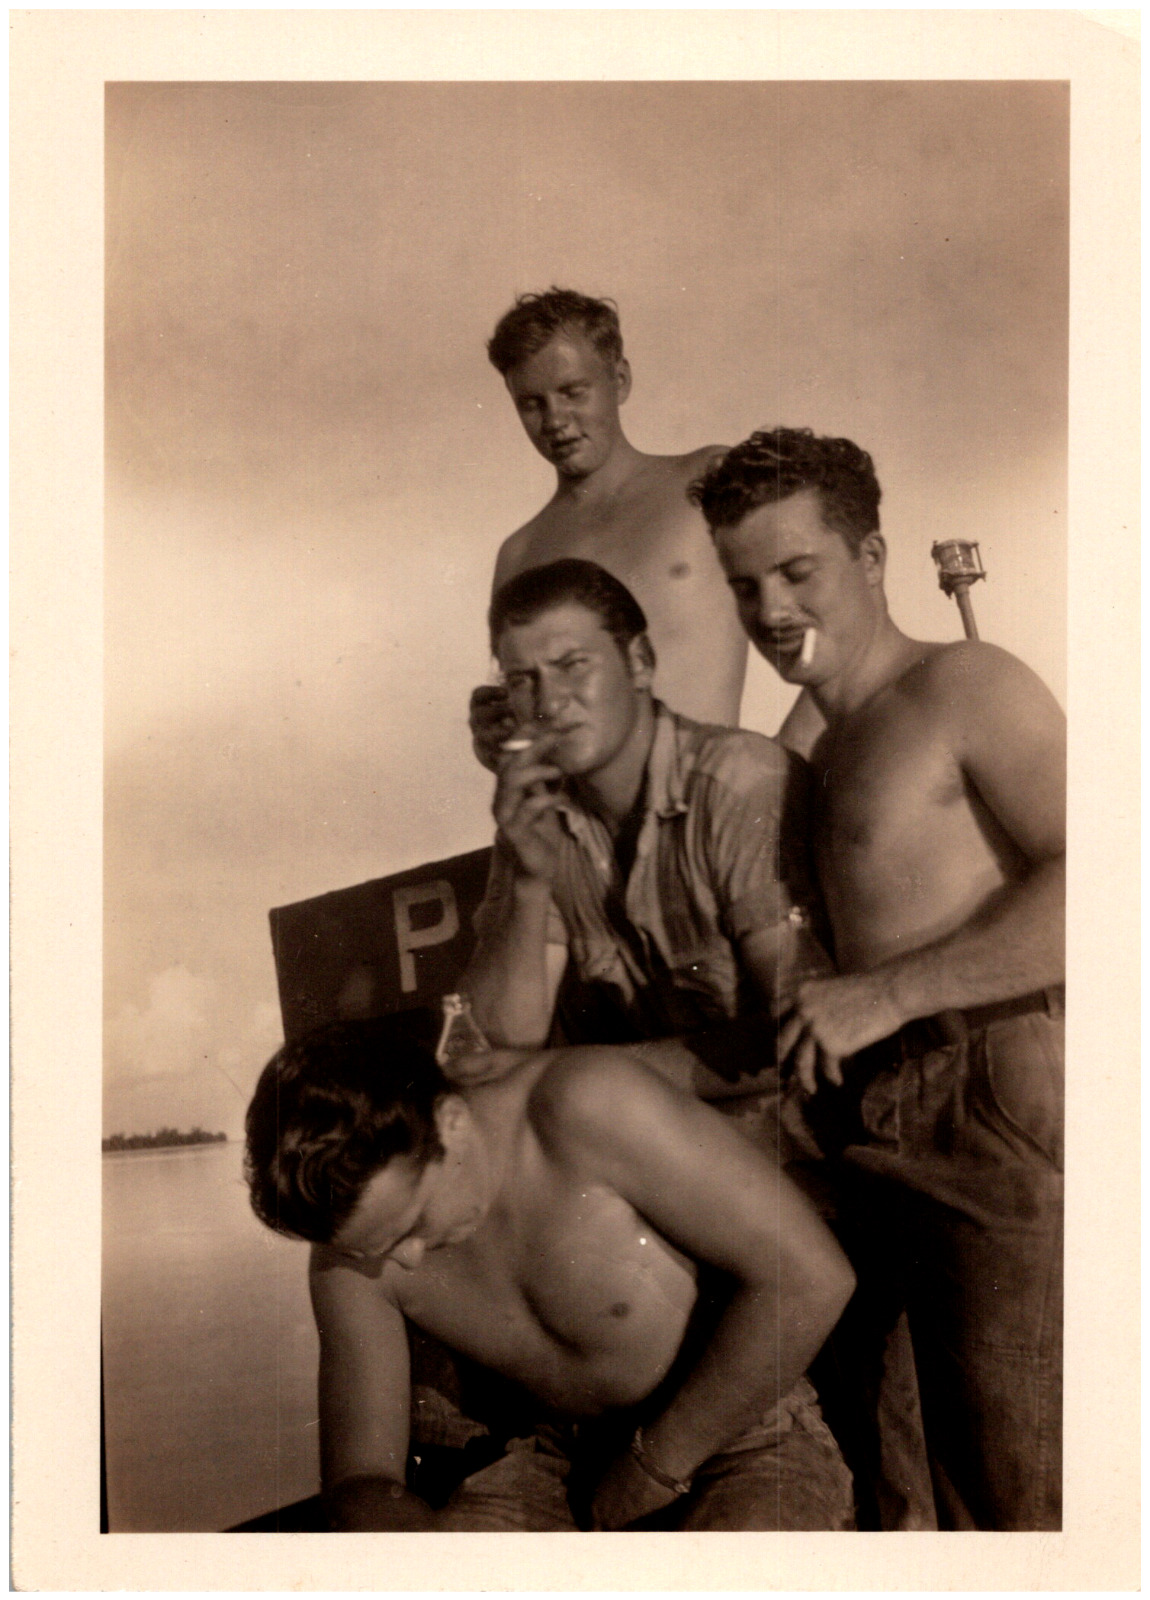 Group of Shirtless Hunky Men Smoking by the Sea Gay Interest 1940s Vintage Photo